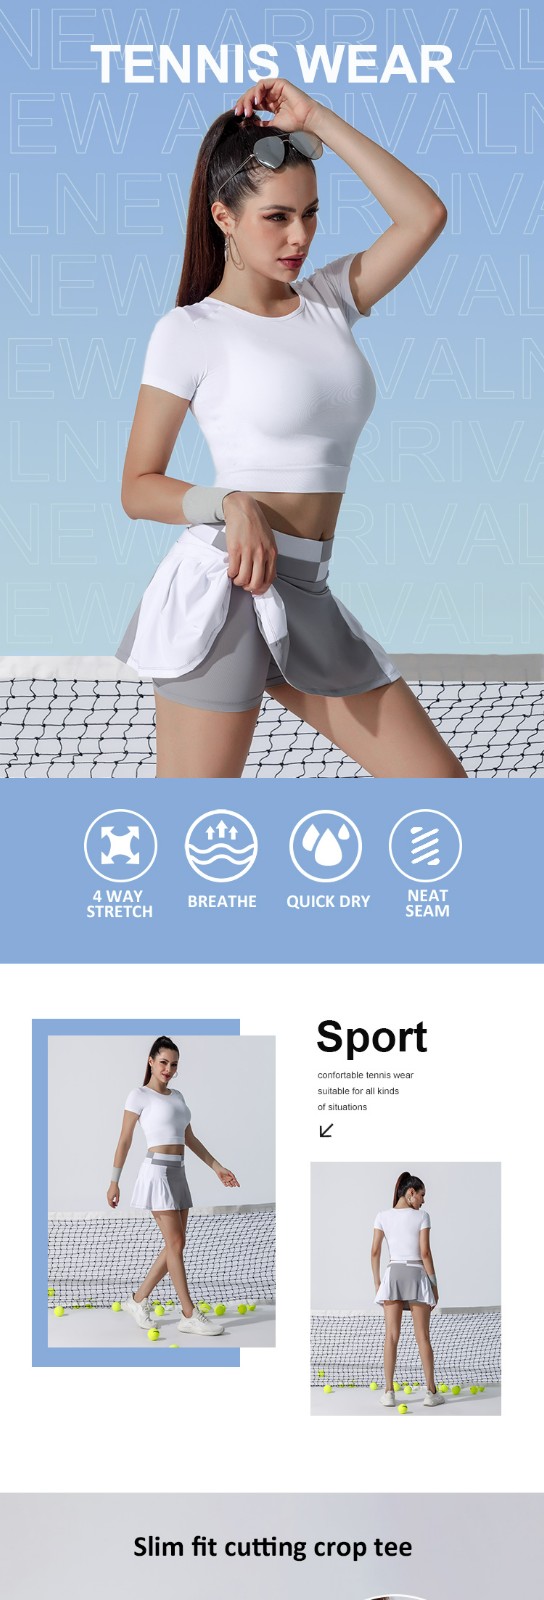 INGOR personalized tennis outfit woman type for yoga-2